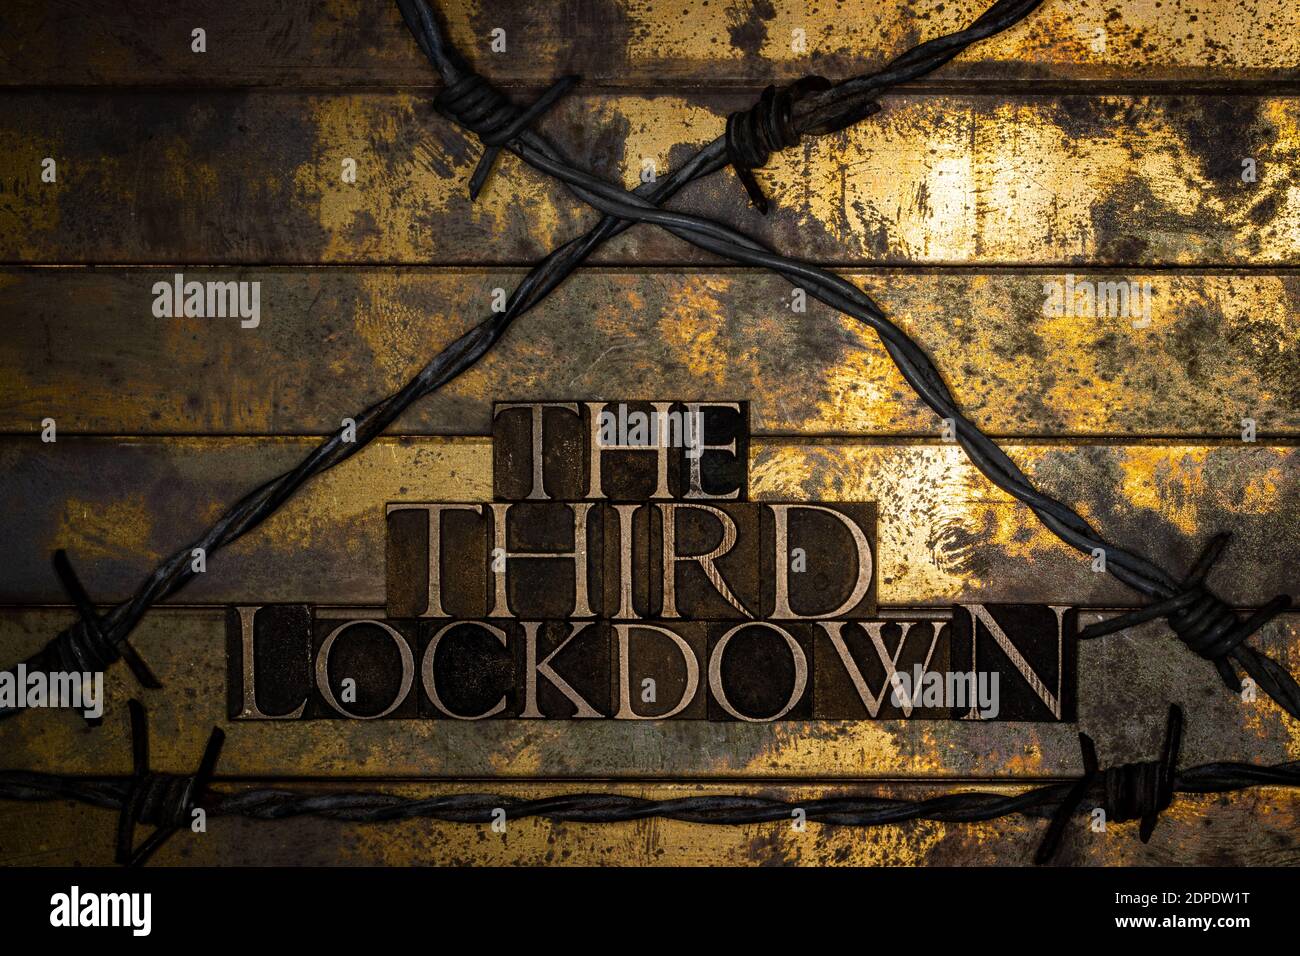 The Third Lockdown text on grunge textured copper and gold background enclosed by barbed wire Stock Photo